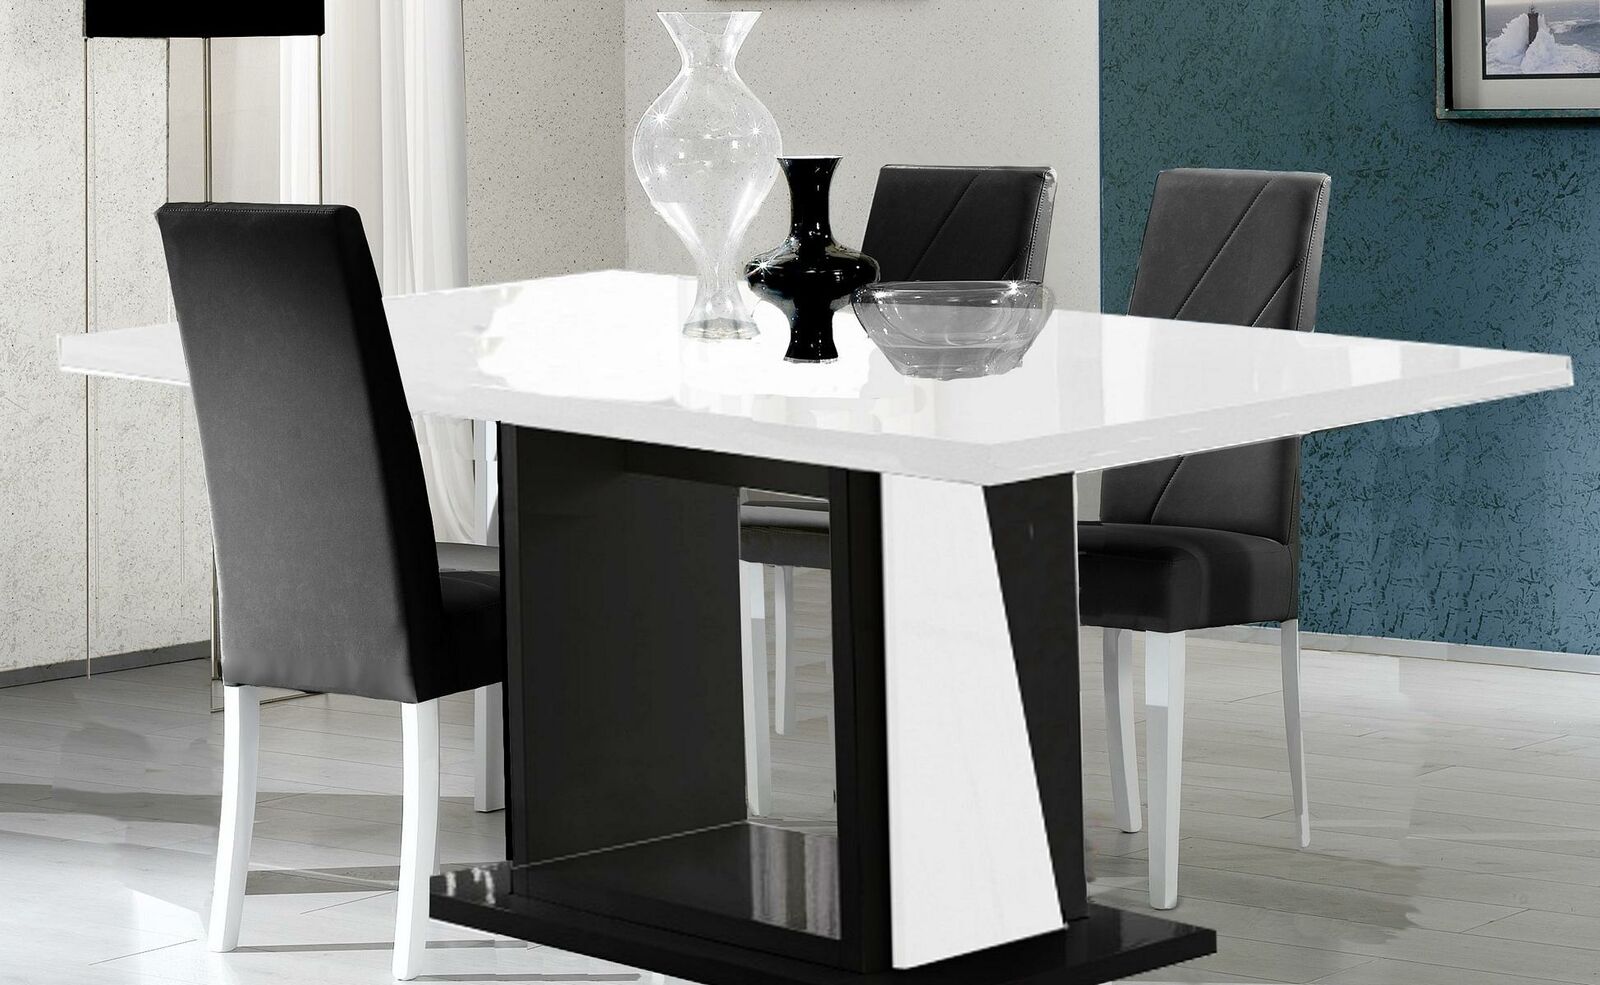 Dining room rectangular extendable gloss dining table in modern style 140-180x90cm